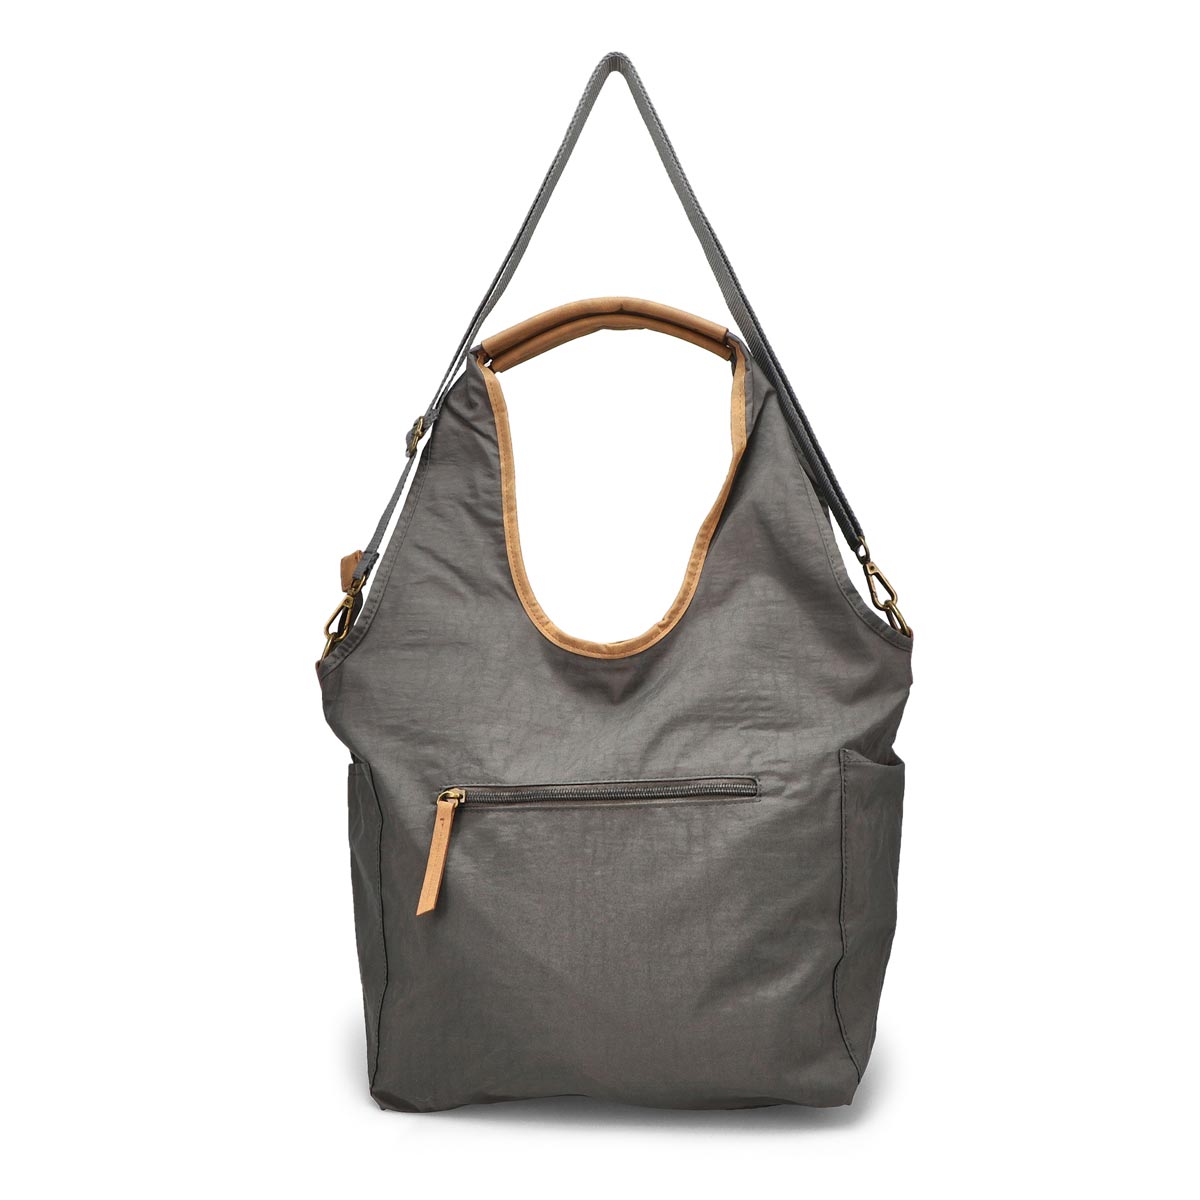 Sac besace R5892 CAMI HOBO, anthracite, femmes